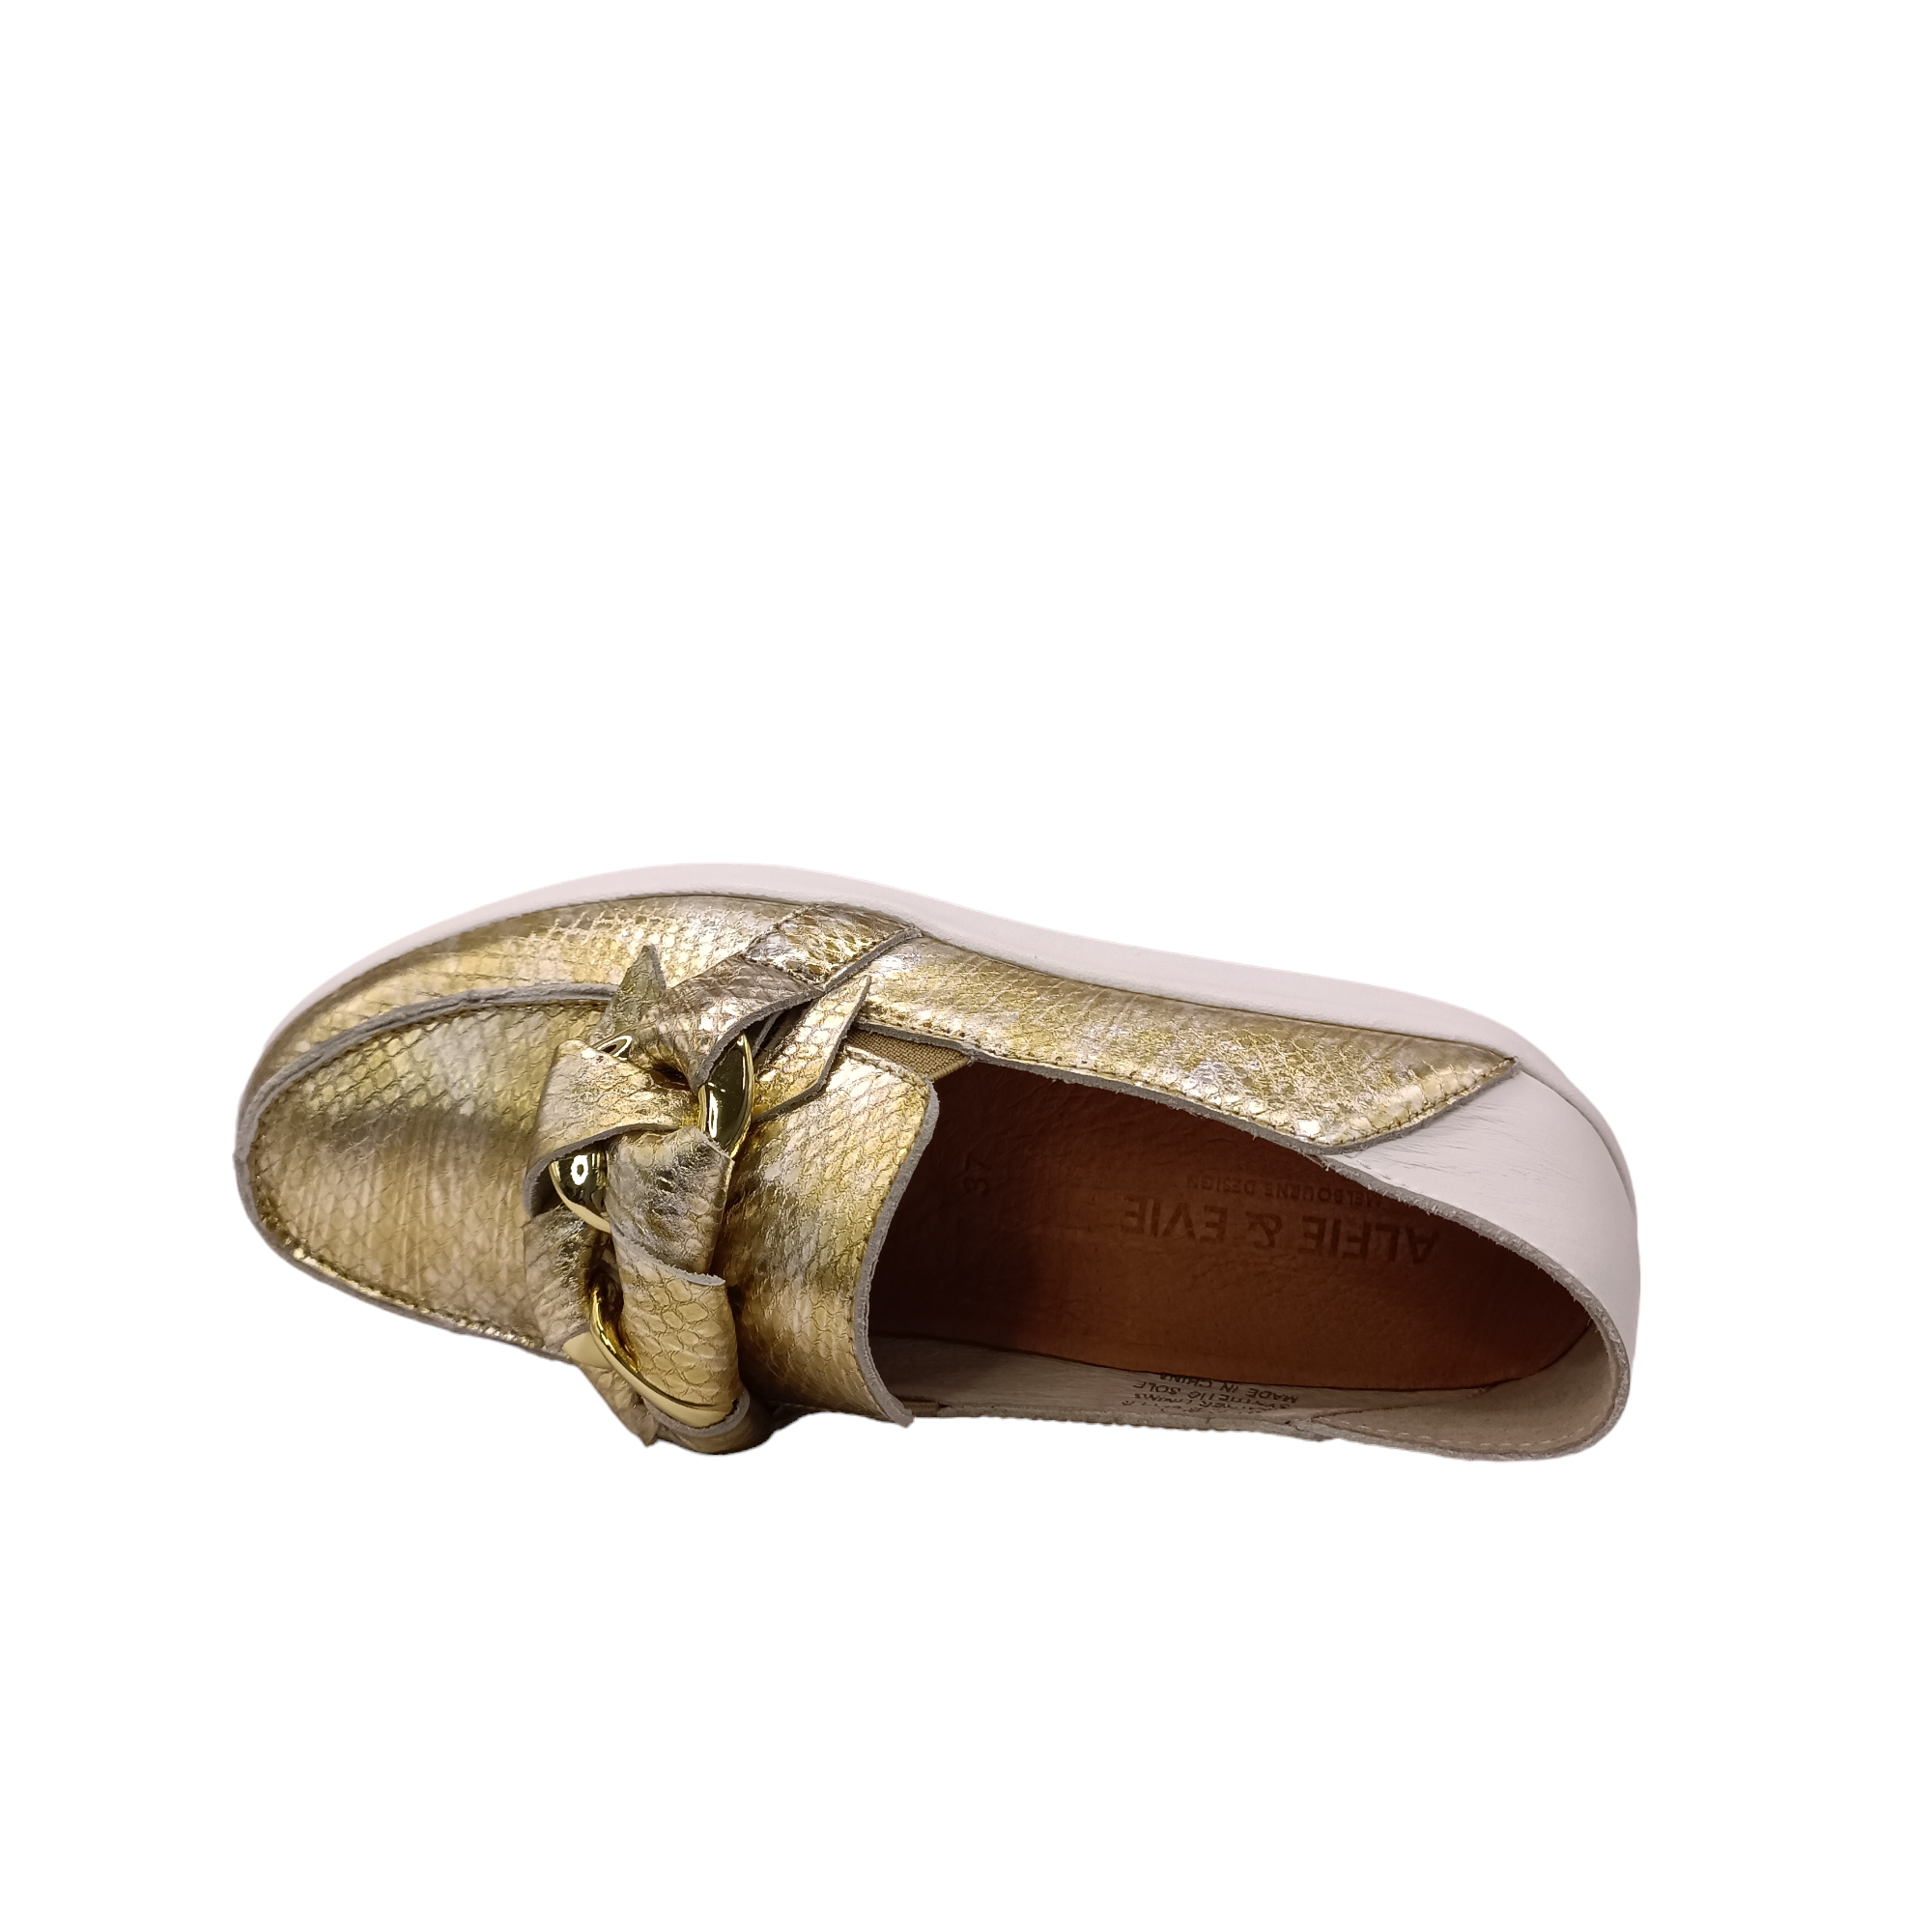 Top view of gold snakeskin leather slip on shoe called mafia from Alfie &amp; Evie. Black leather laced in silver chain decorating the top, white leather heel with a white sole. Shop Alfie &amp; Evie Womens Shoes online and In-Store with shoe&amp;me Mount Maunganui.